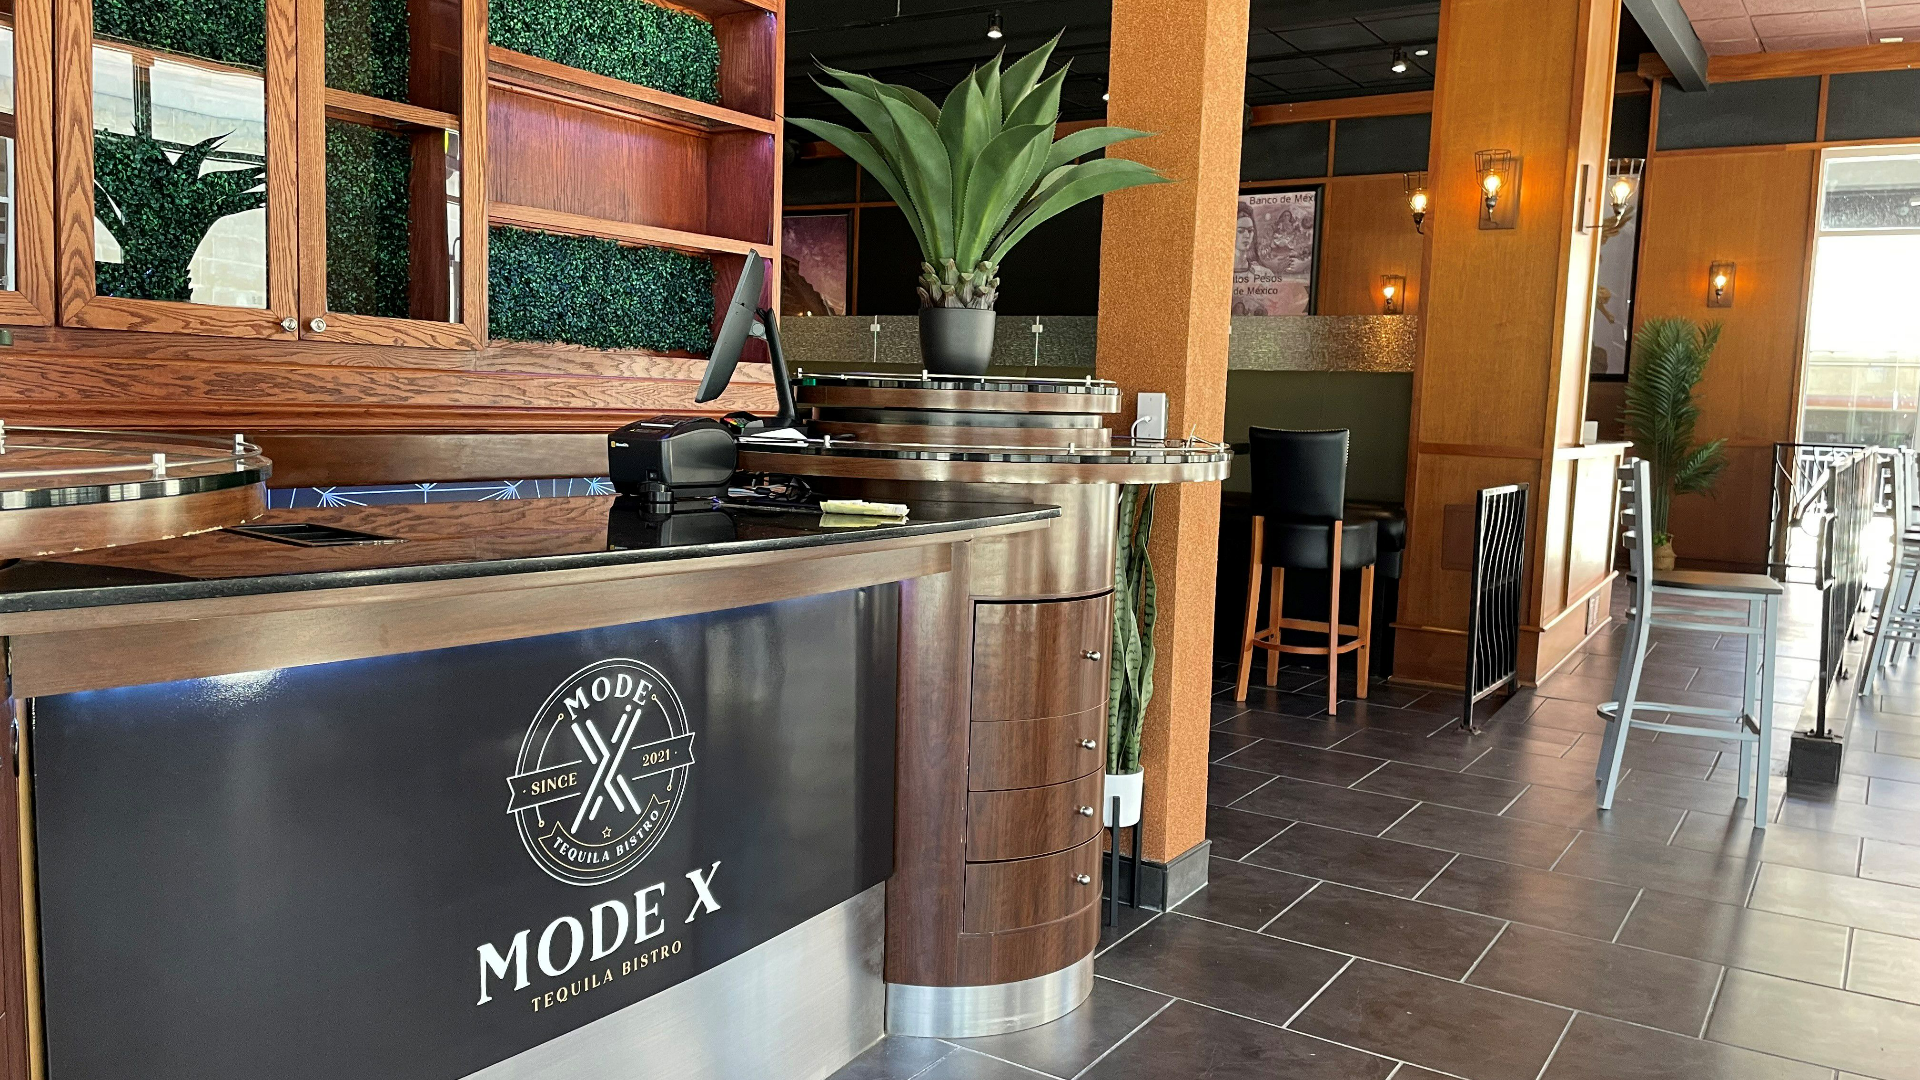 Mode X Tequila Bistro, a tequila bar with authentic Mexican food, is planning a soft opening for Tuesday, May 24 at The Greene Town Center in Beavercreek.